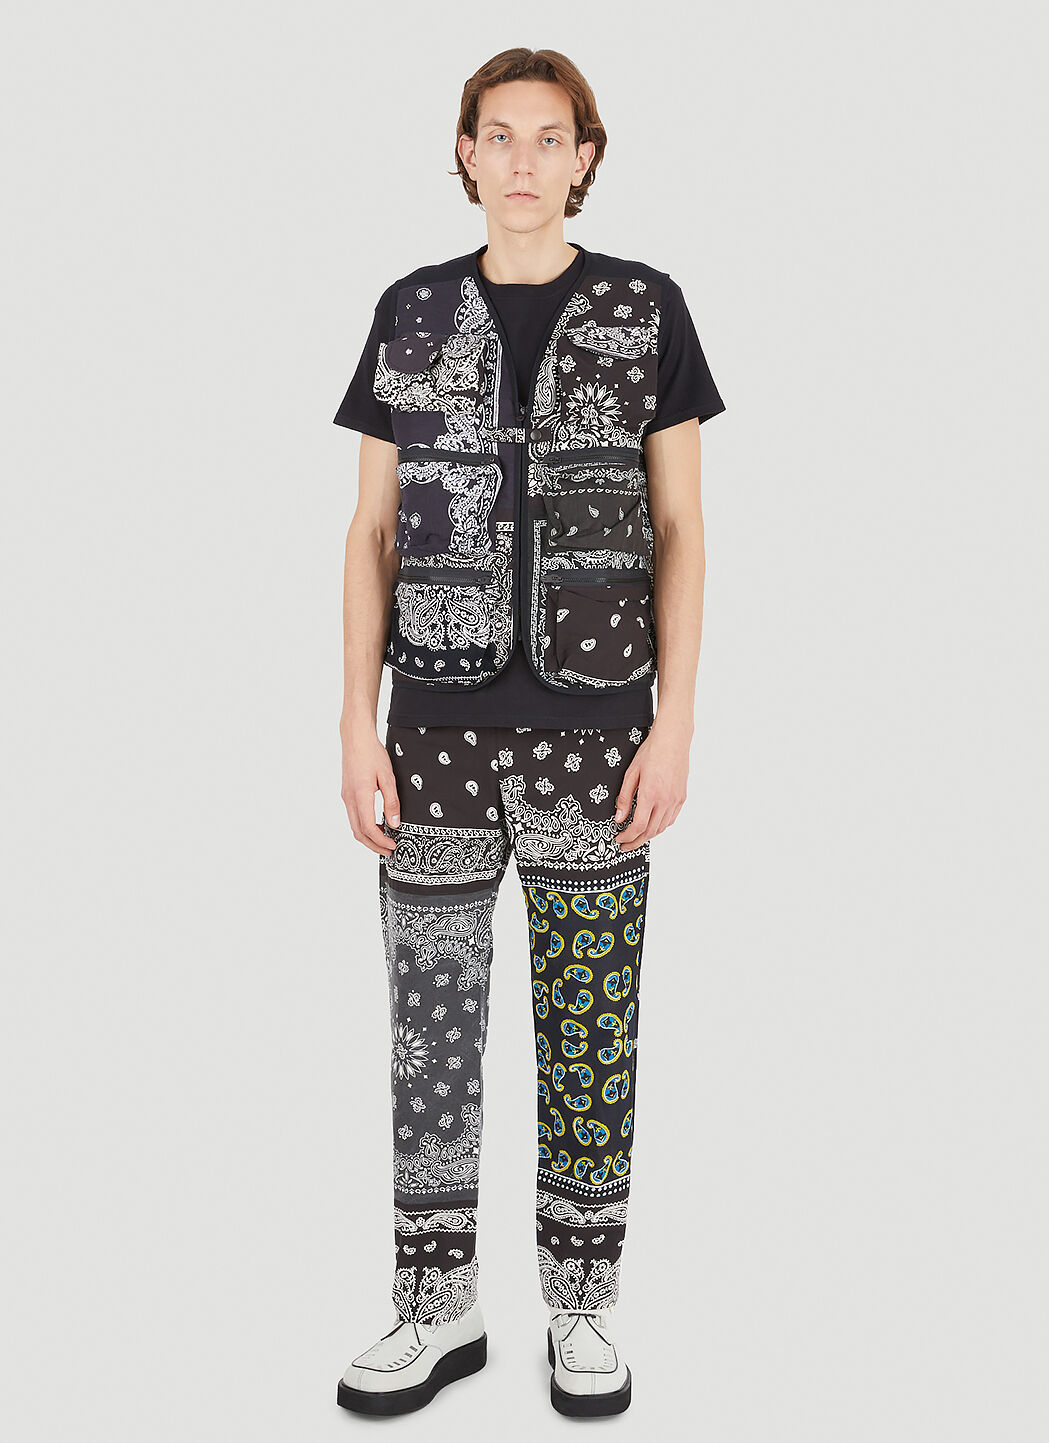 Children of the Discordance Black and Brown Patchwork Bandana Pants  Children of the Discordance